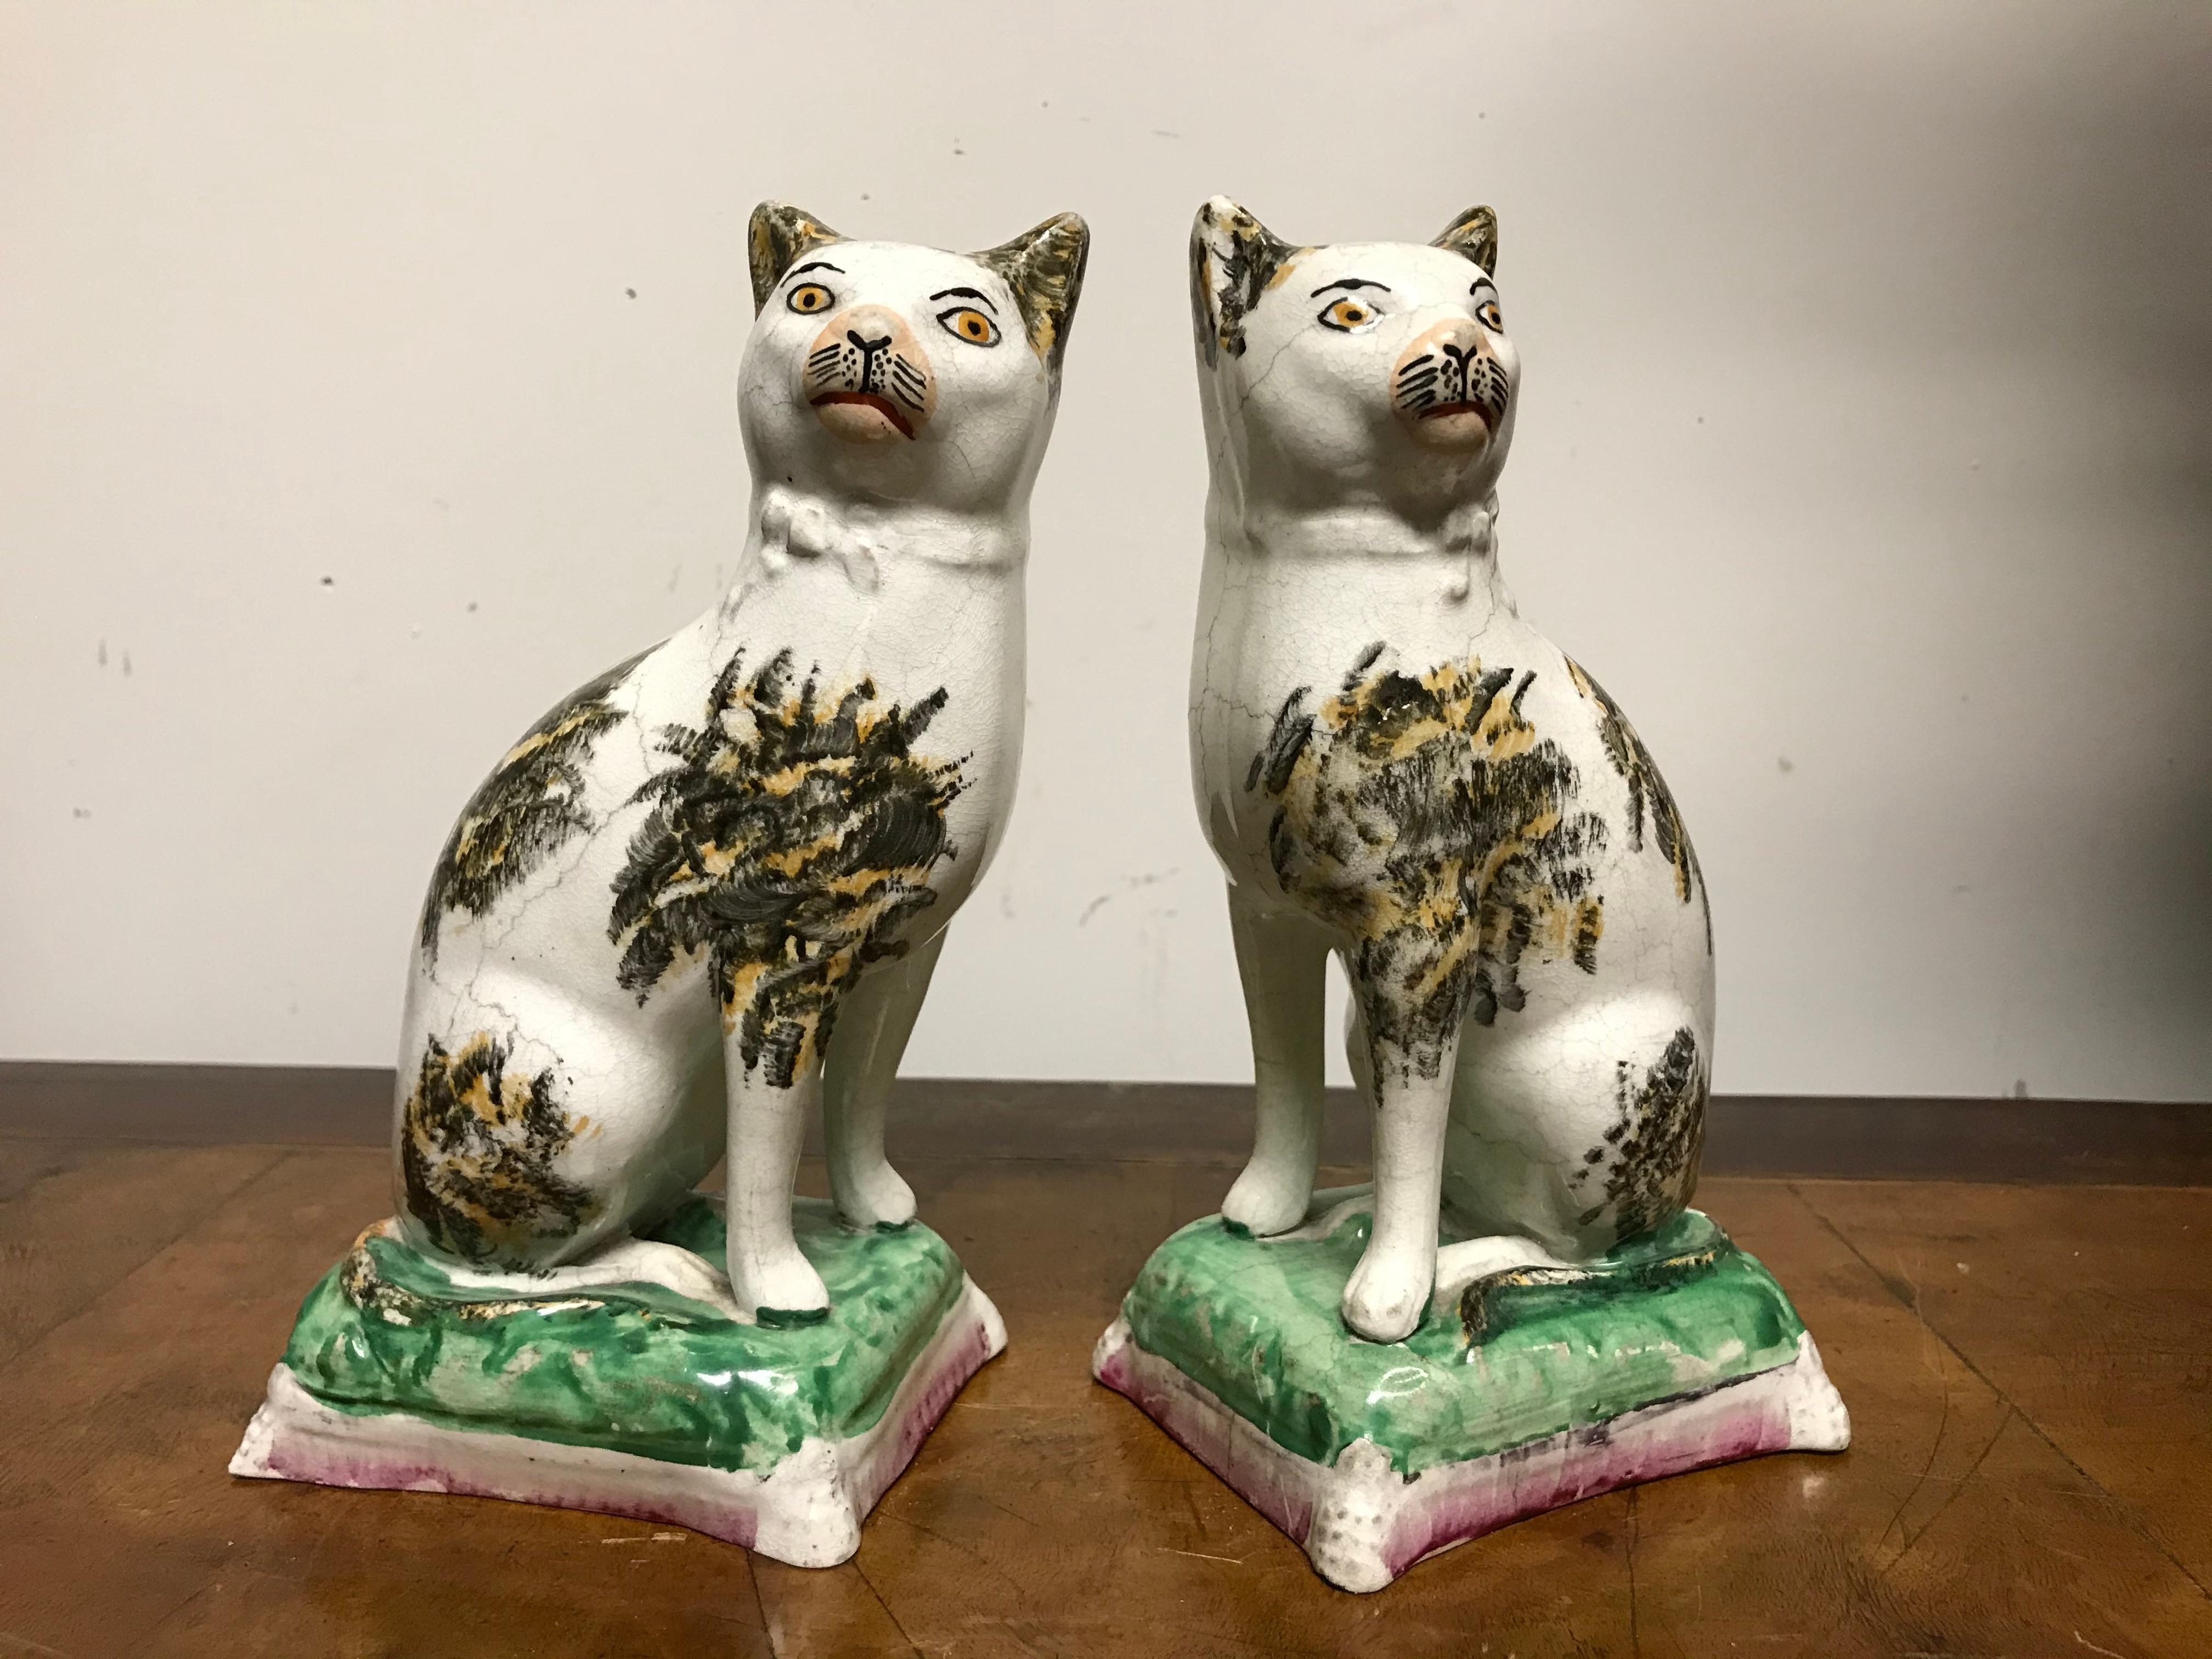 A wonderful pair of early 19th century Staffordshire glazed pottery cats shown seated on fancy pillows. Something about the quizzical looks on their faces makes this charming pair all the more appealing.